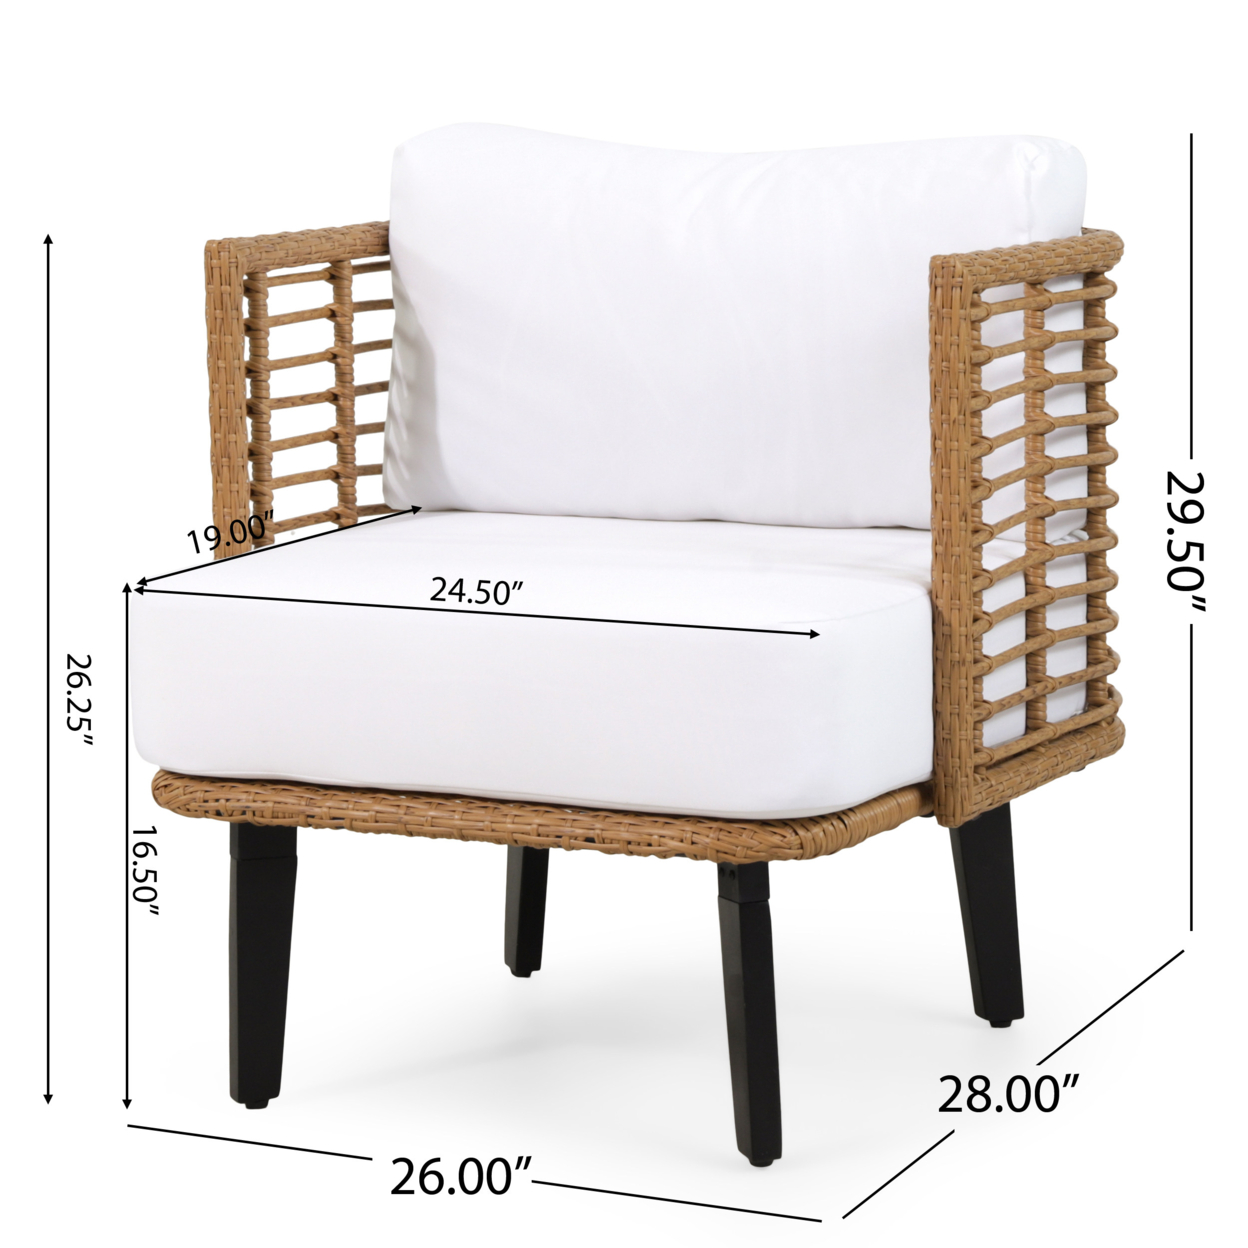 Rauser Outdoor Wicker Club Chair With Water Resistant Cushion, Light Brown And White